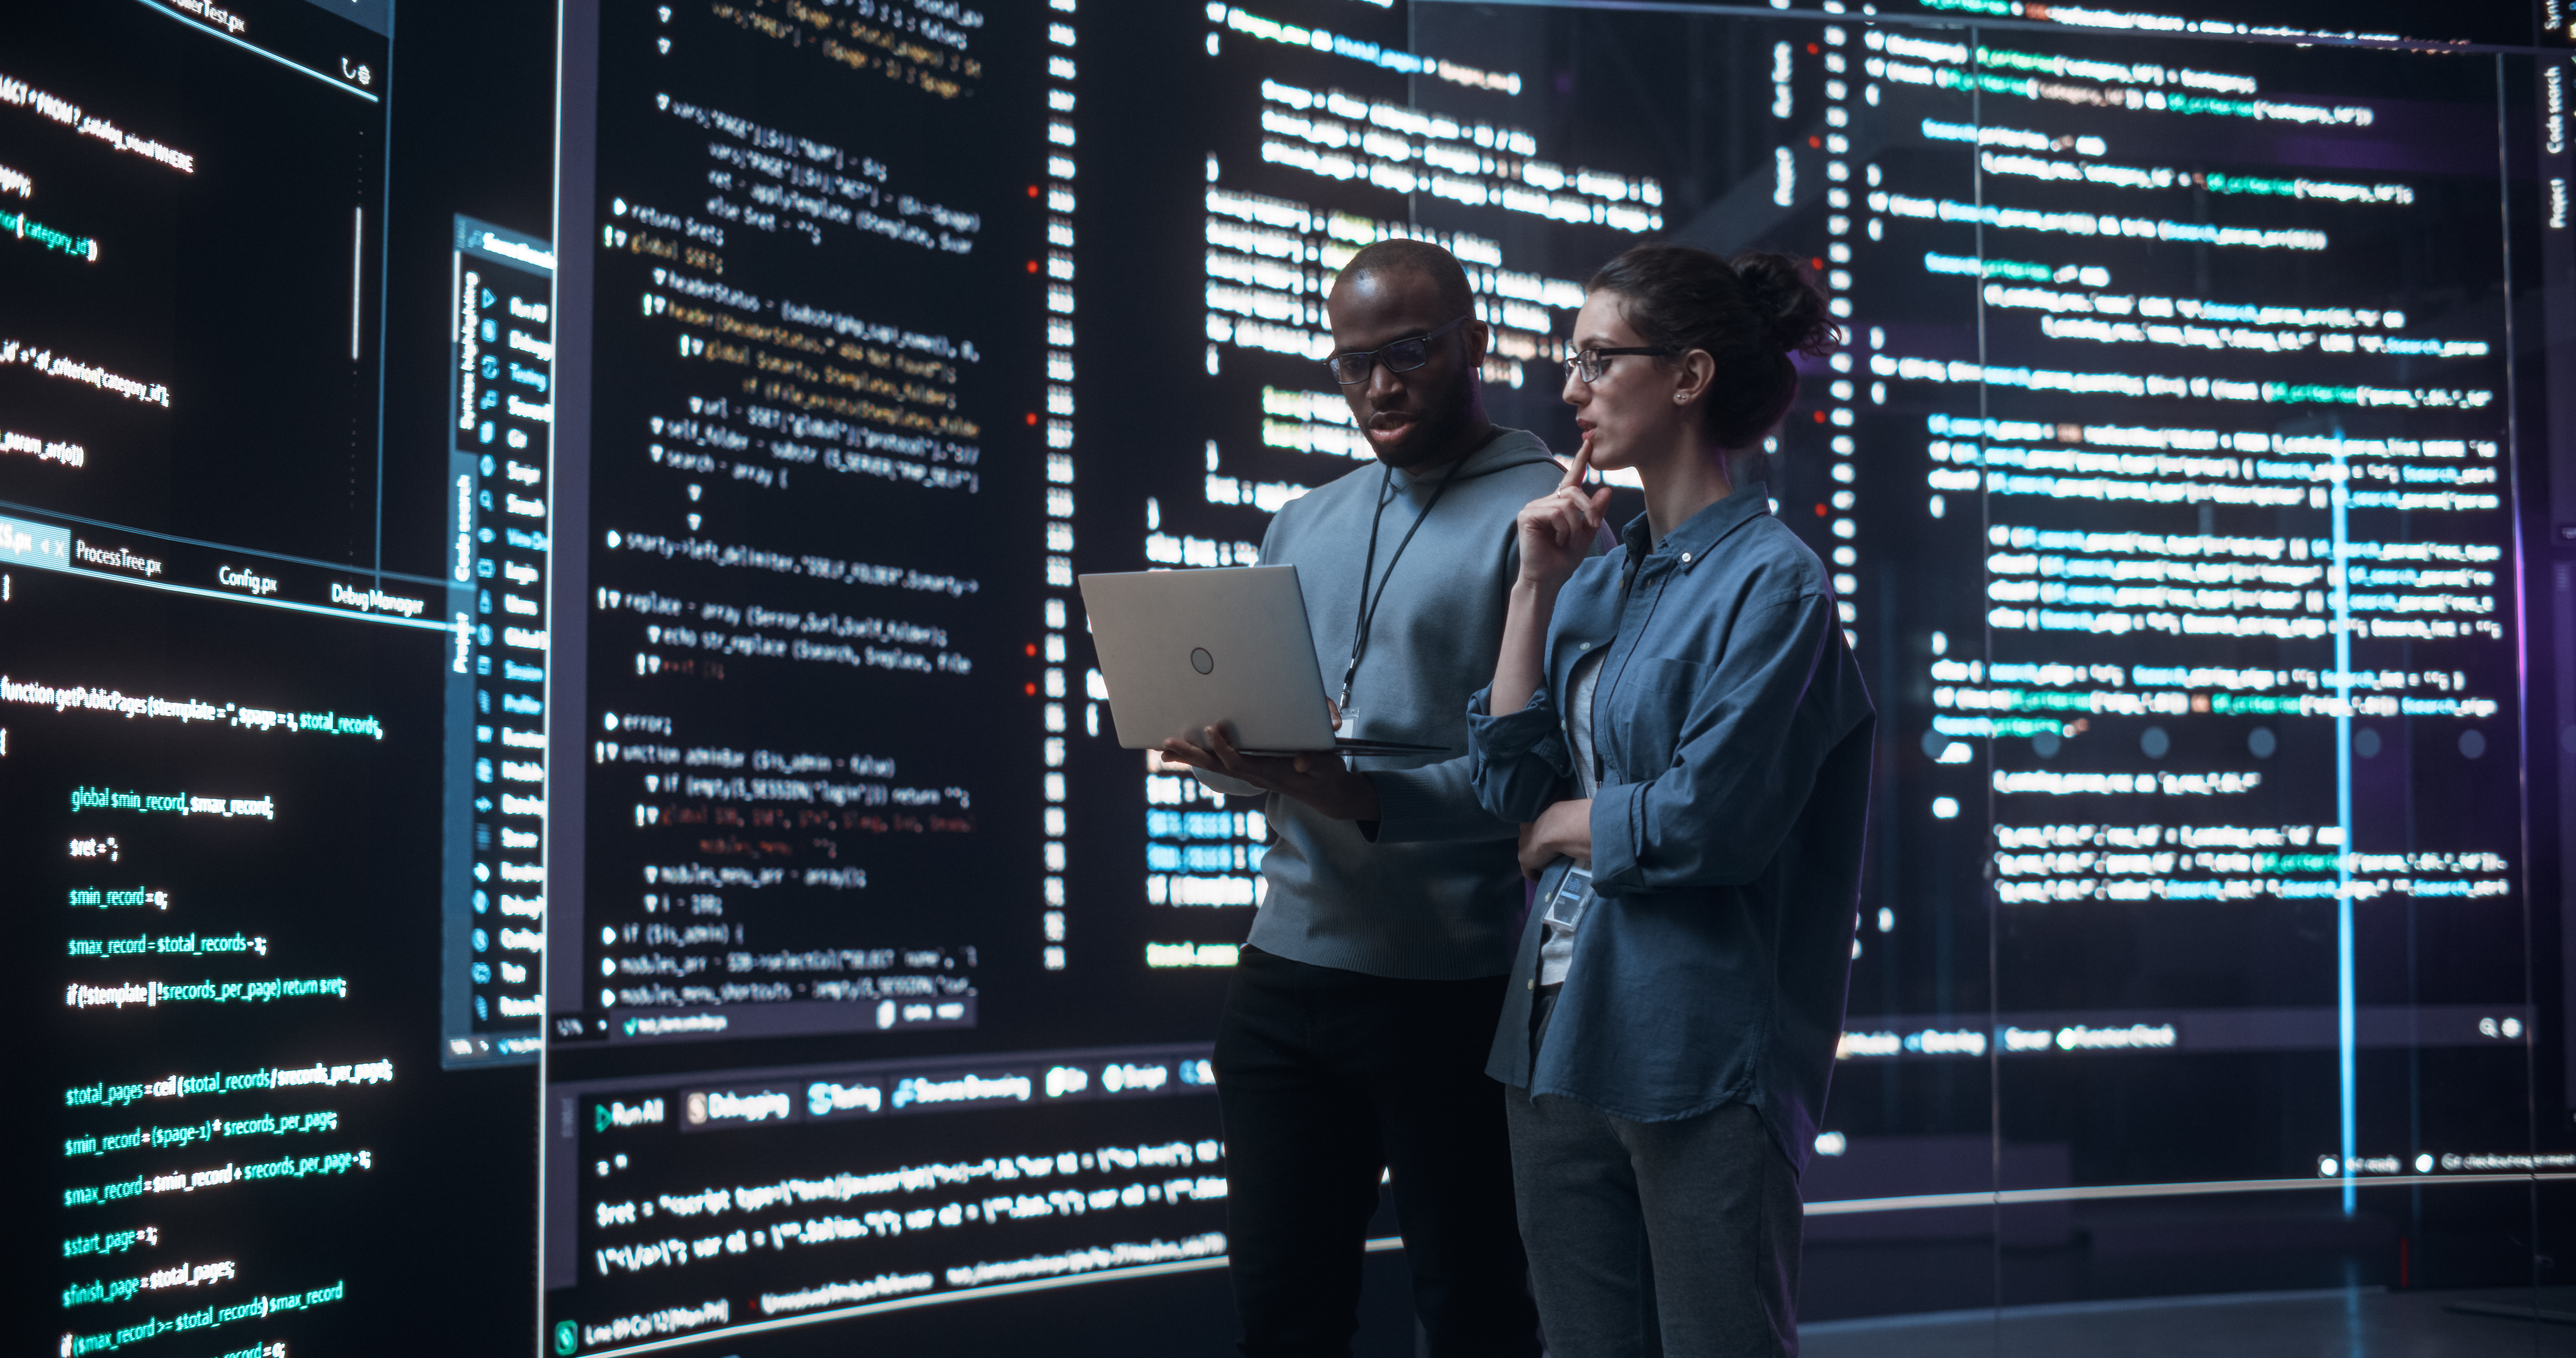 Portrait of Two Diverse Developers Using Laptop Computer, Discussing Lines of Code that Appear on Big Screens Surrounding Them. Male and Female Programmers Creating a Software Together, Fixing Bugs